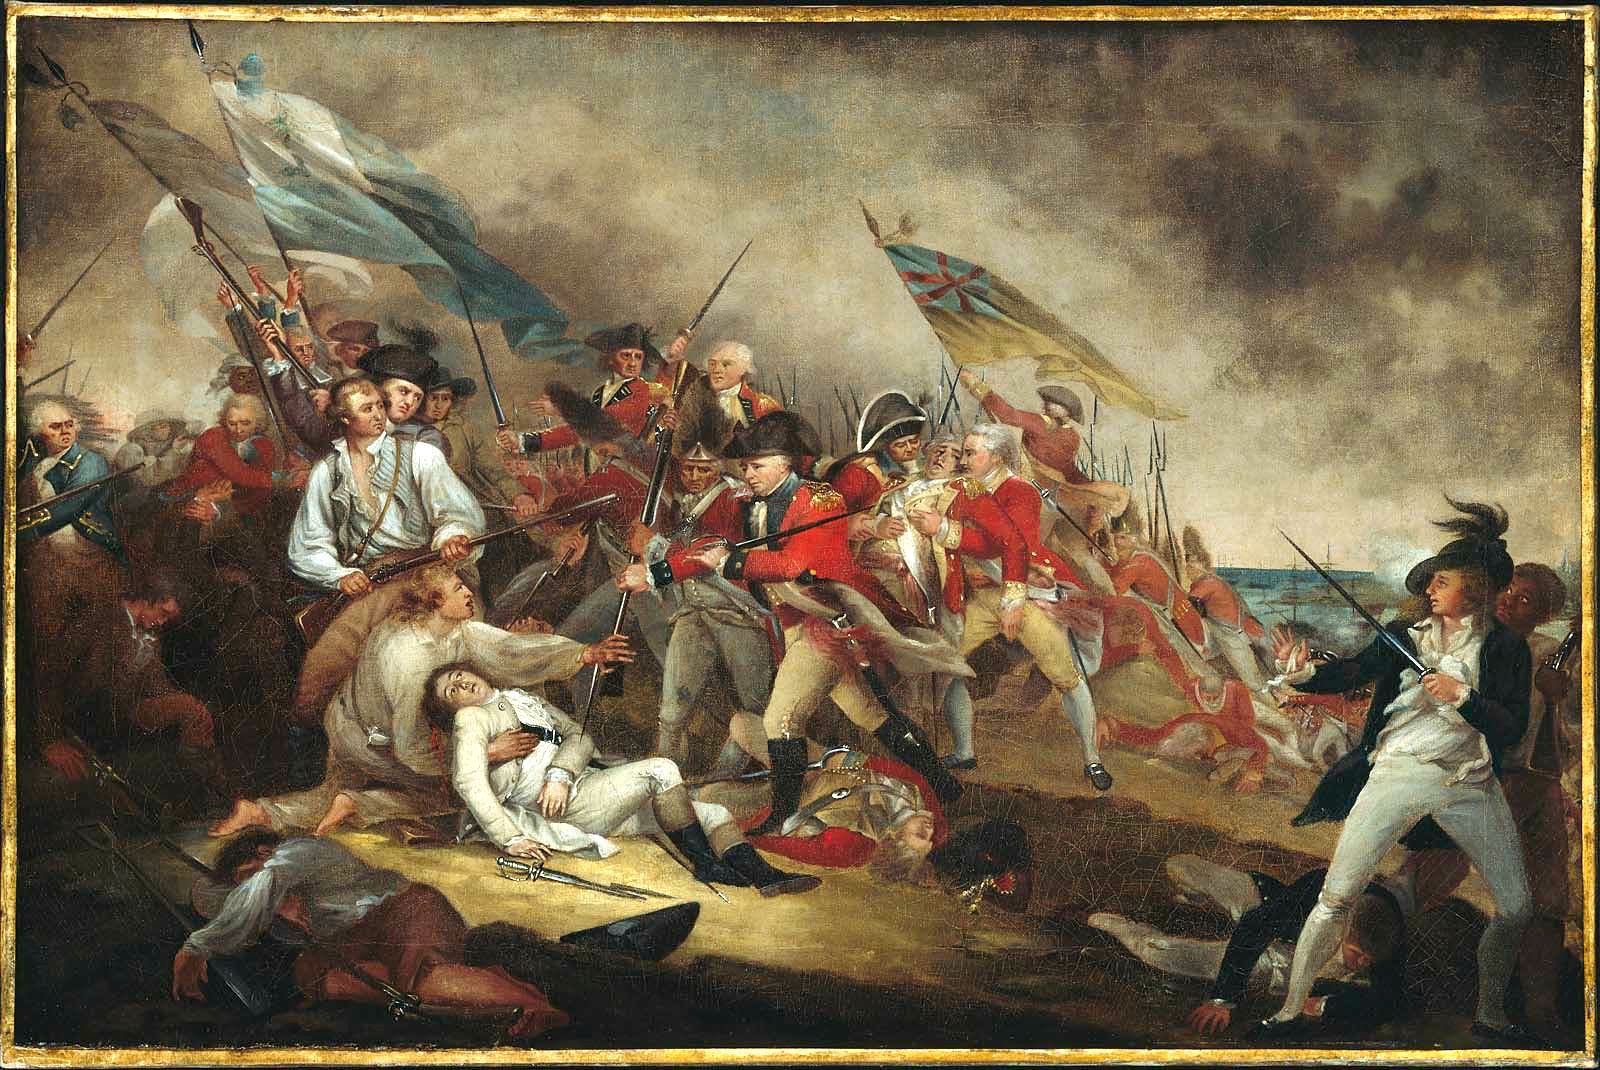 In his famous painting of the Death of General Warren at Bunker Hill, John Trumbull pointed out there were When fighting broke out there were tragedies on both sides. Warren was the much loved President of the Provincial Congress revolutionary of Massachusetts. Nearby in the center of the painting British Major Pitcairn dies in the arms of his son. Boston Museum of Fine Arts